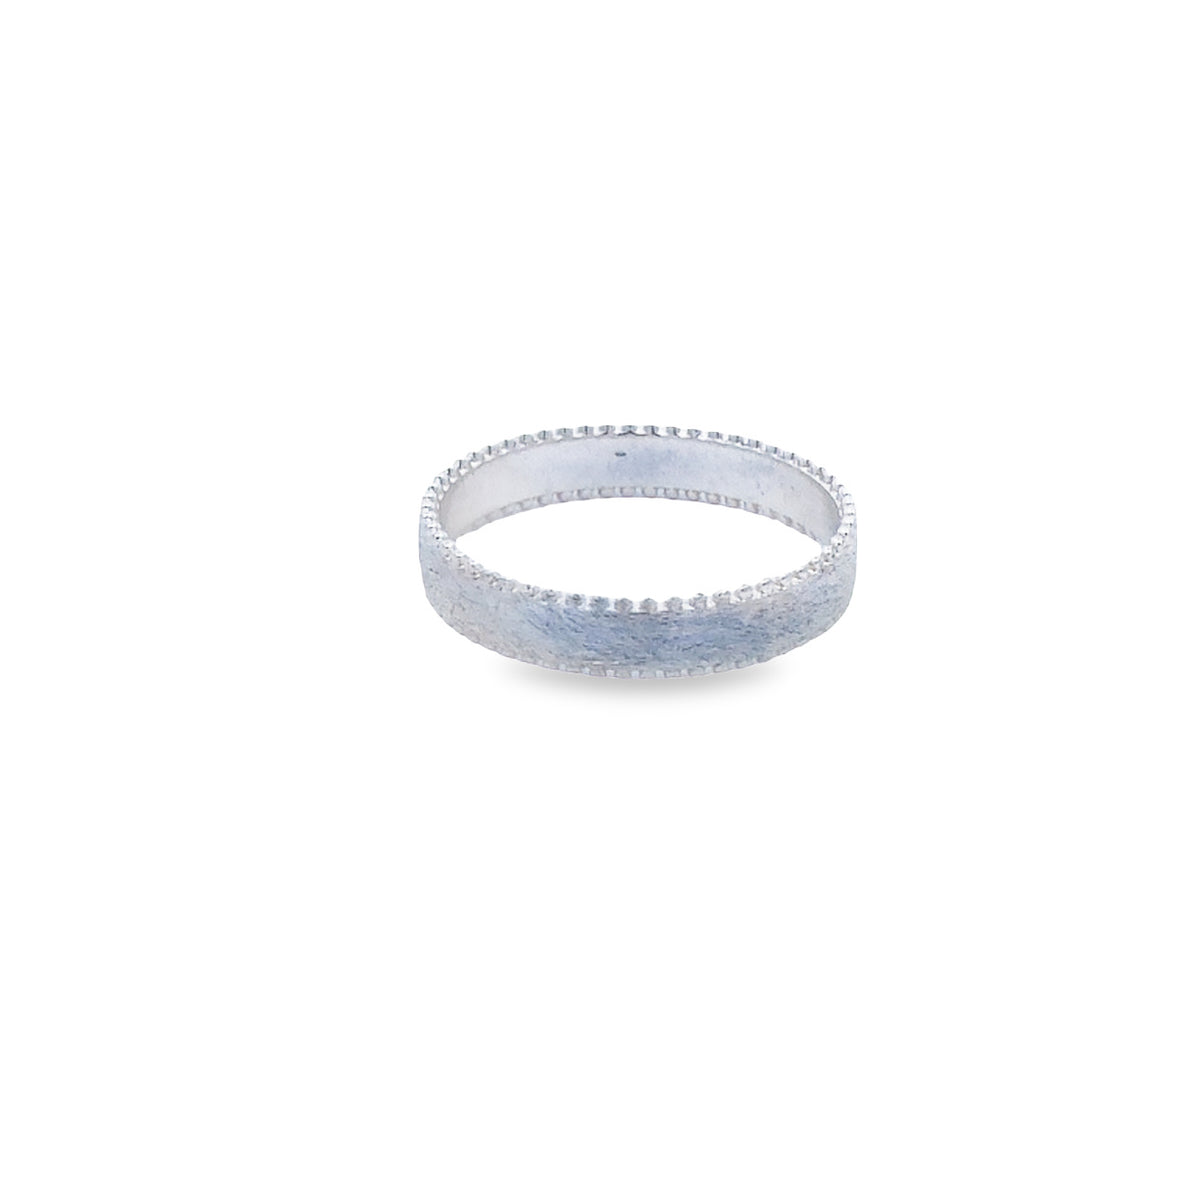 Onatah Sterling Silver Matte Finish Ring With Ball Edge Detail Size P